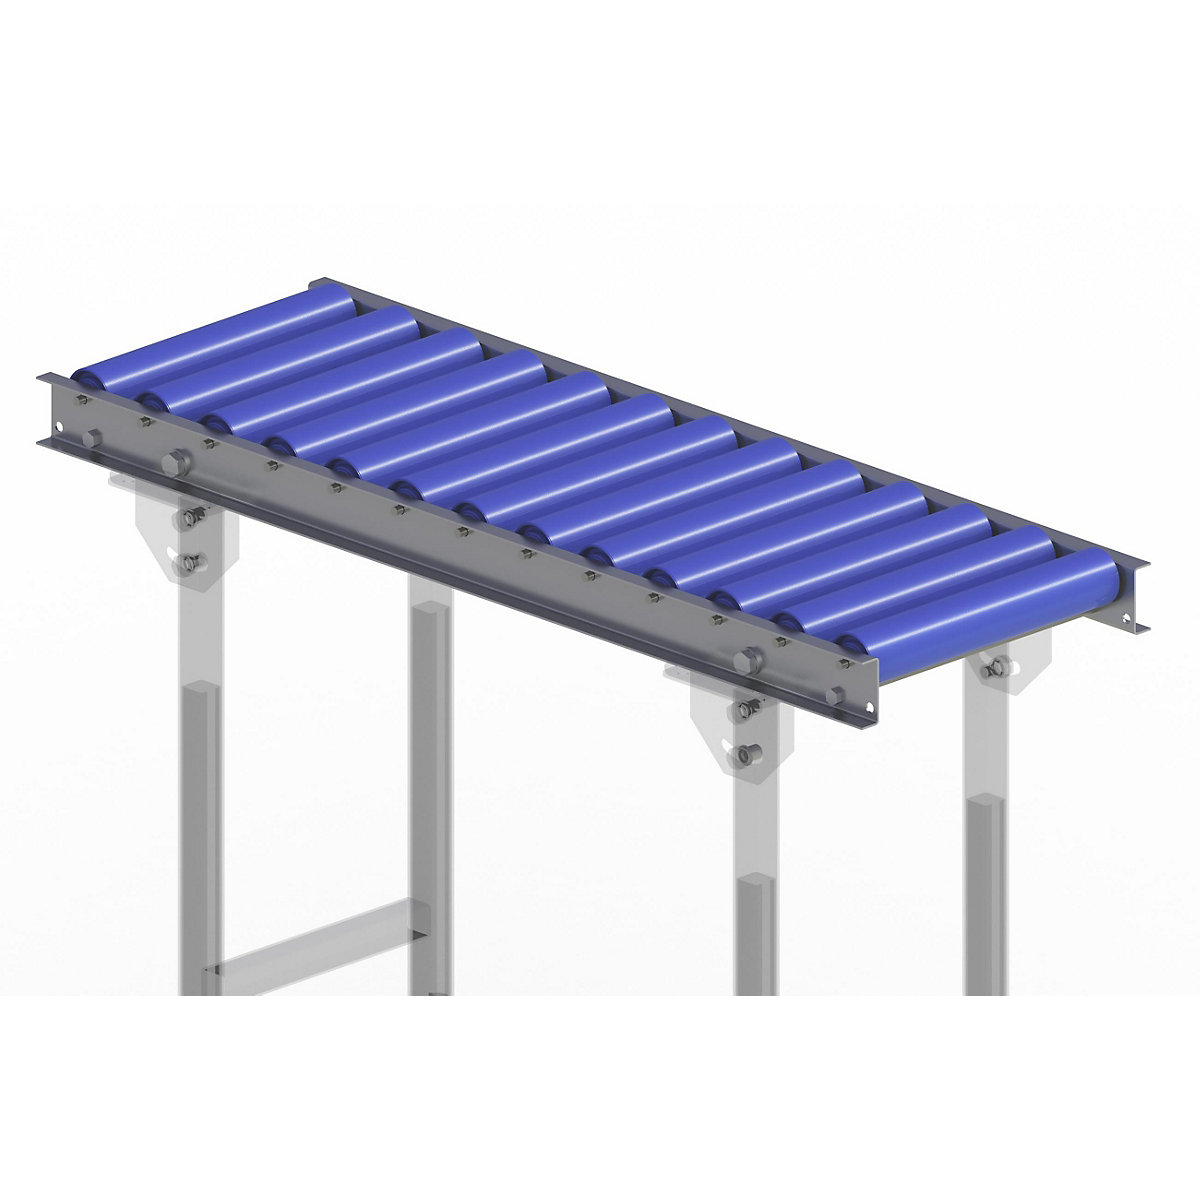 Light duty roller conveyor, steel frame with plastic rollers – Gura, track width 300 mm, axle spacing 75 mm, length 1 m-11